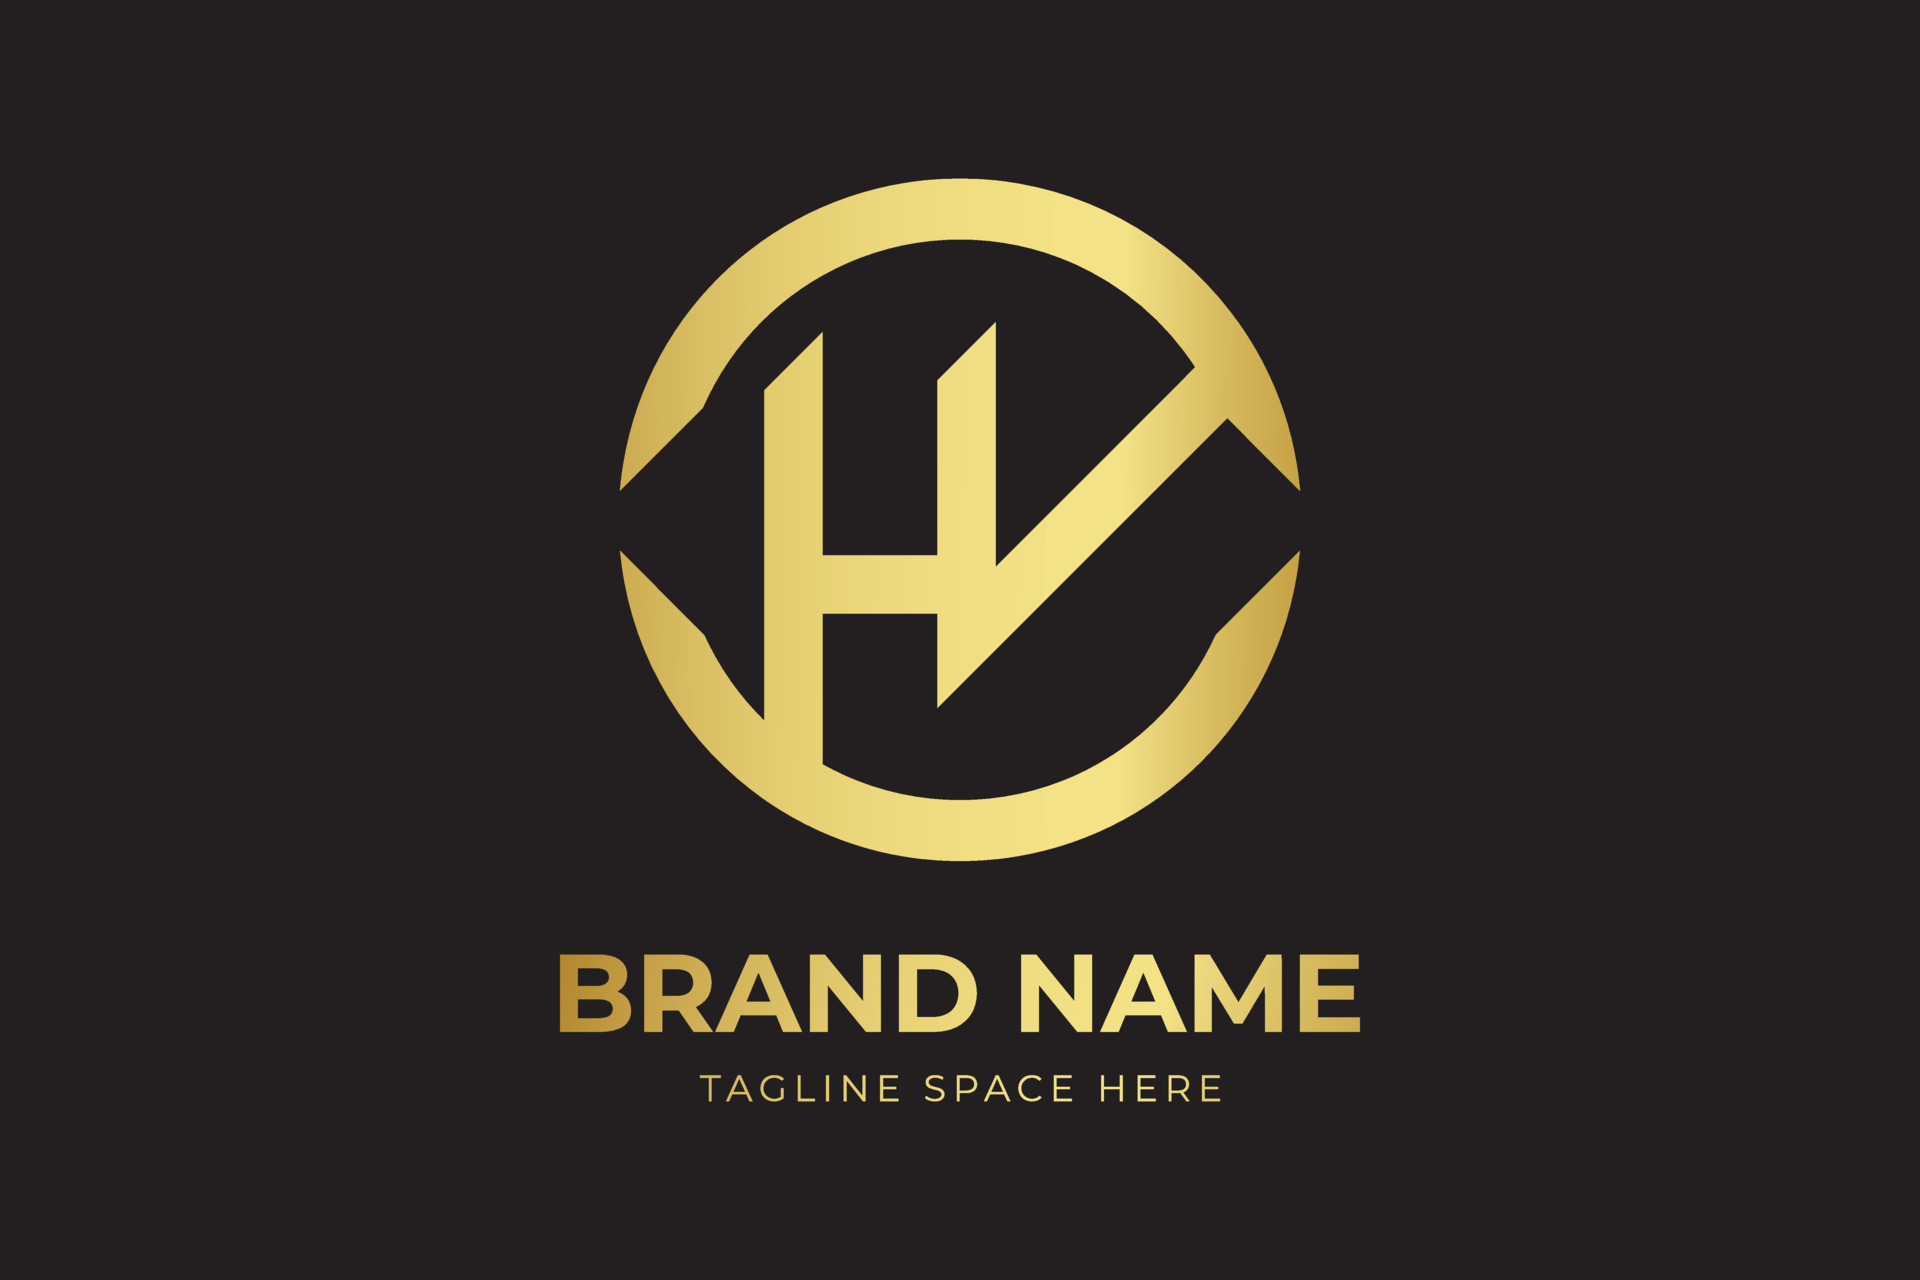 Hv h v letter modern logo design with yellow background and swoosh. Hv h v  letter modern logo design with swoosh cutting the | CanStock